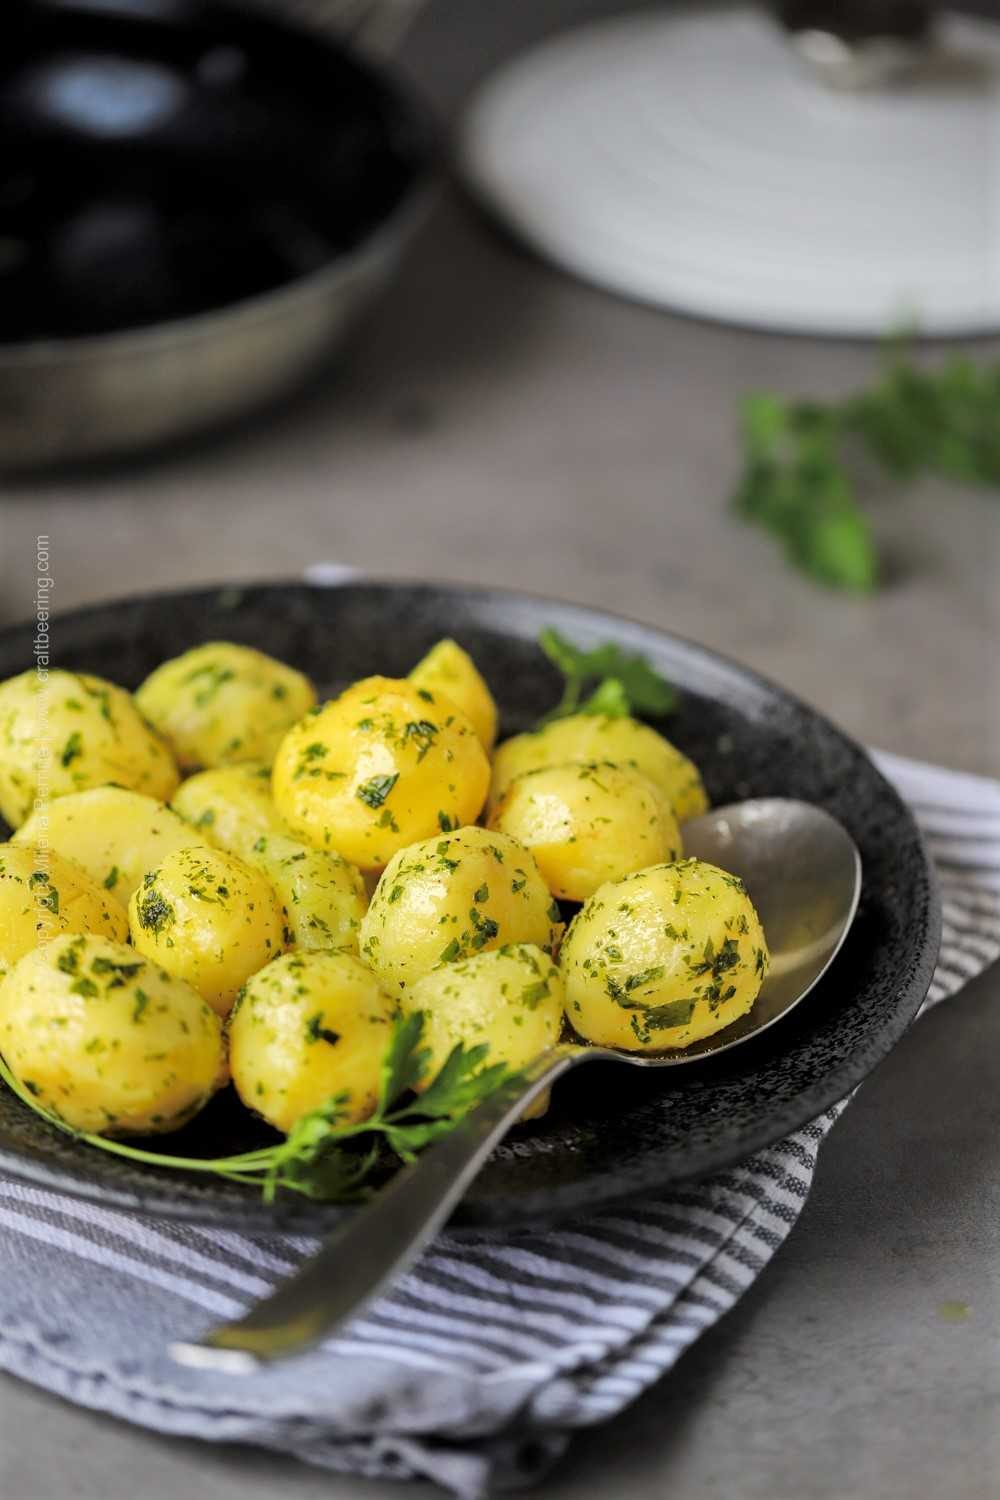 German boiled potatoes tossed in butter and parsley.